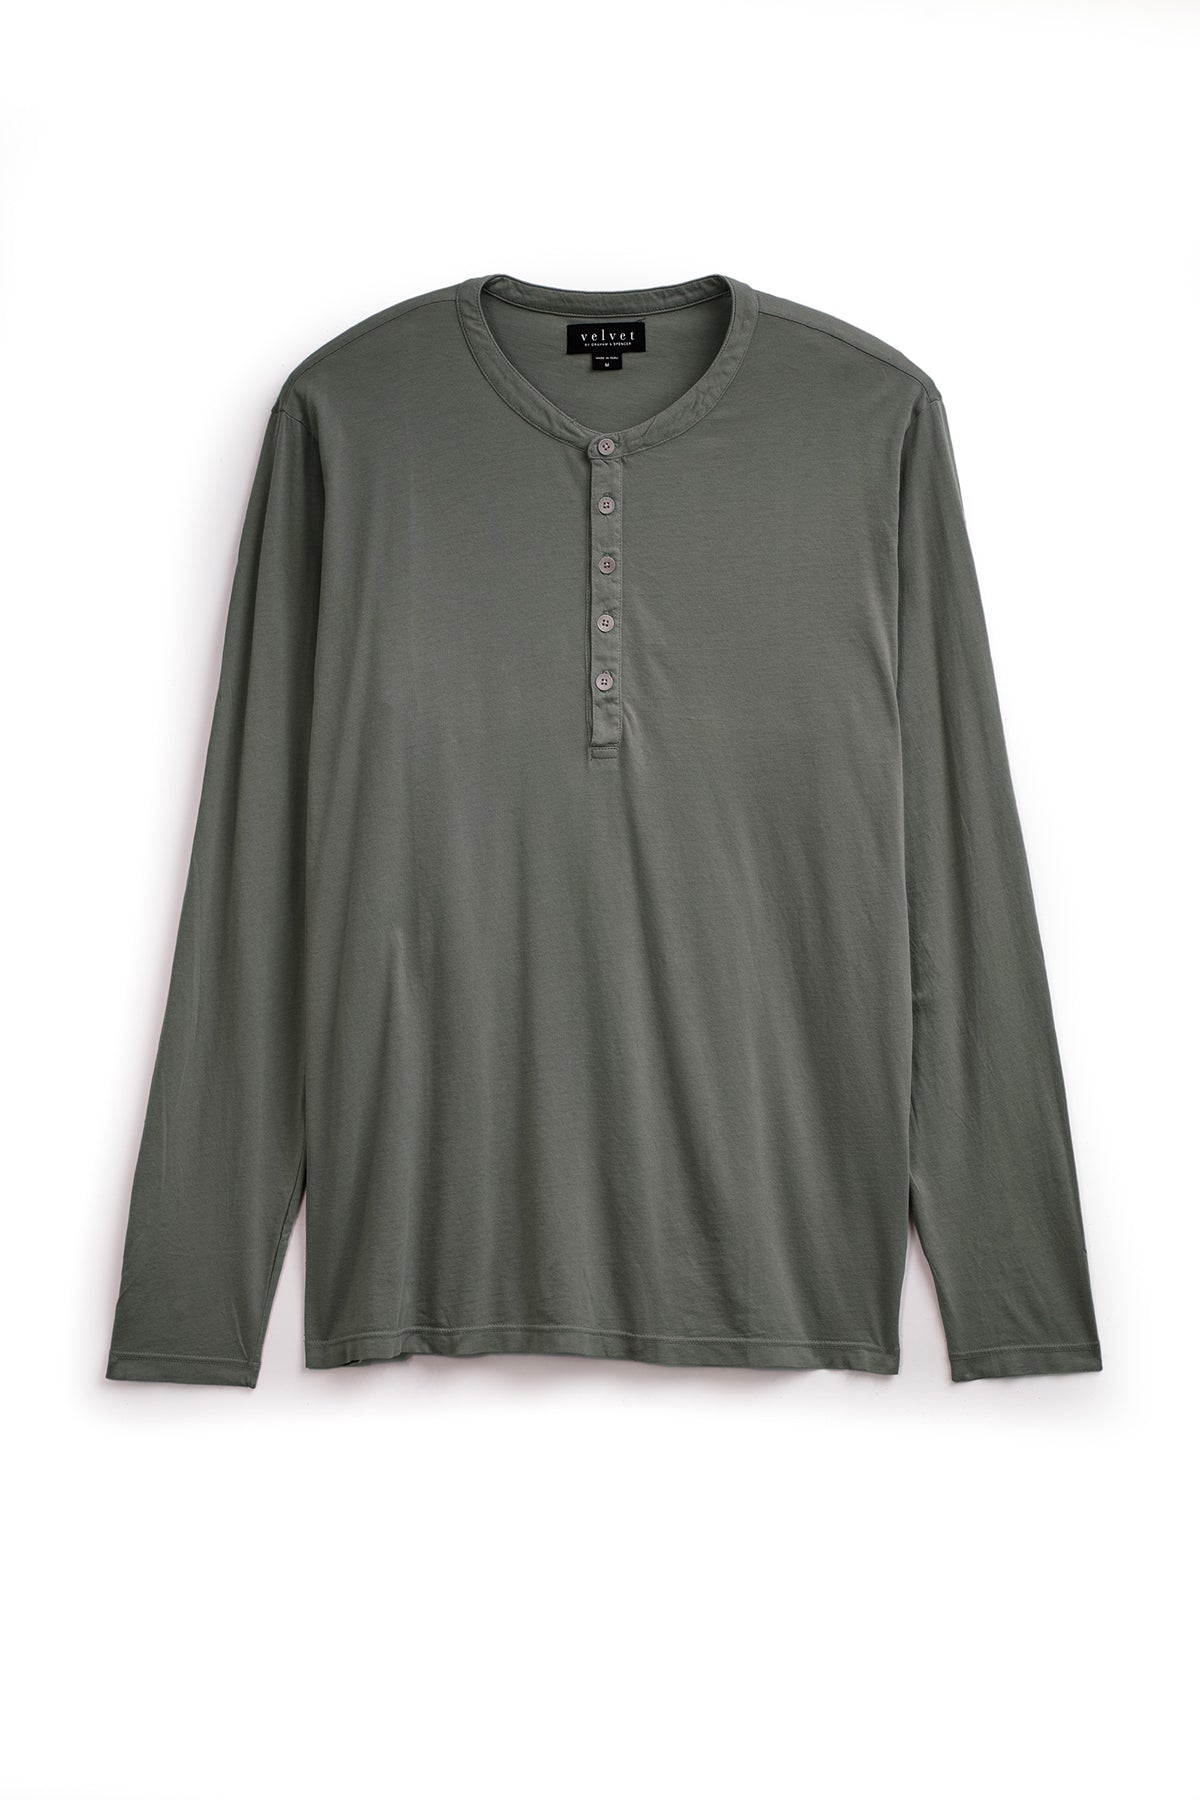   A long-sleeve, olive green ALVARO HENLEY by Velvet by Graham & Spencer crafted from lightweight whisper knit fabric, featuring a round collar and a button placket down the front. 